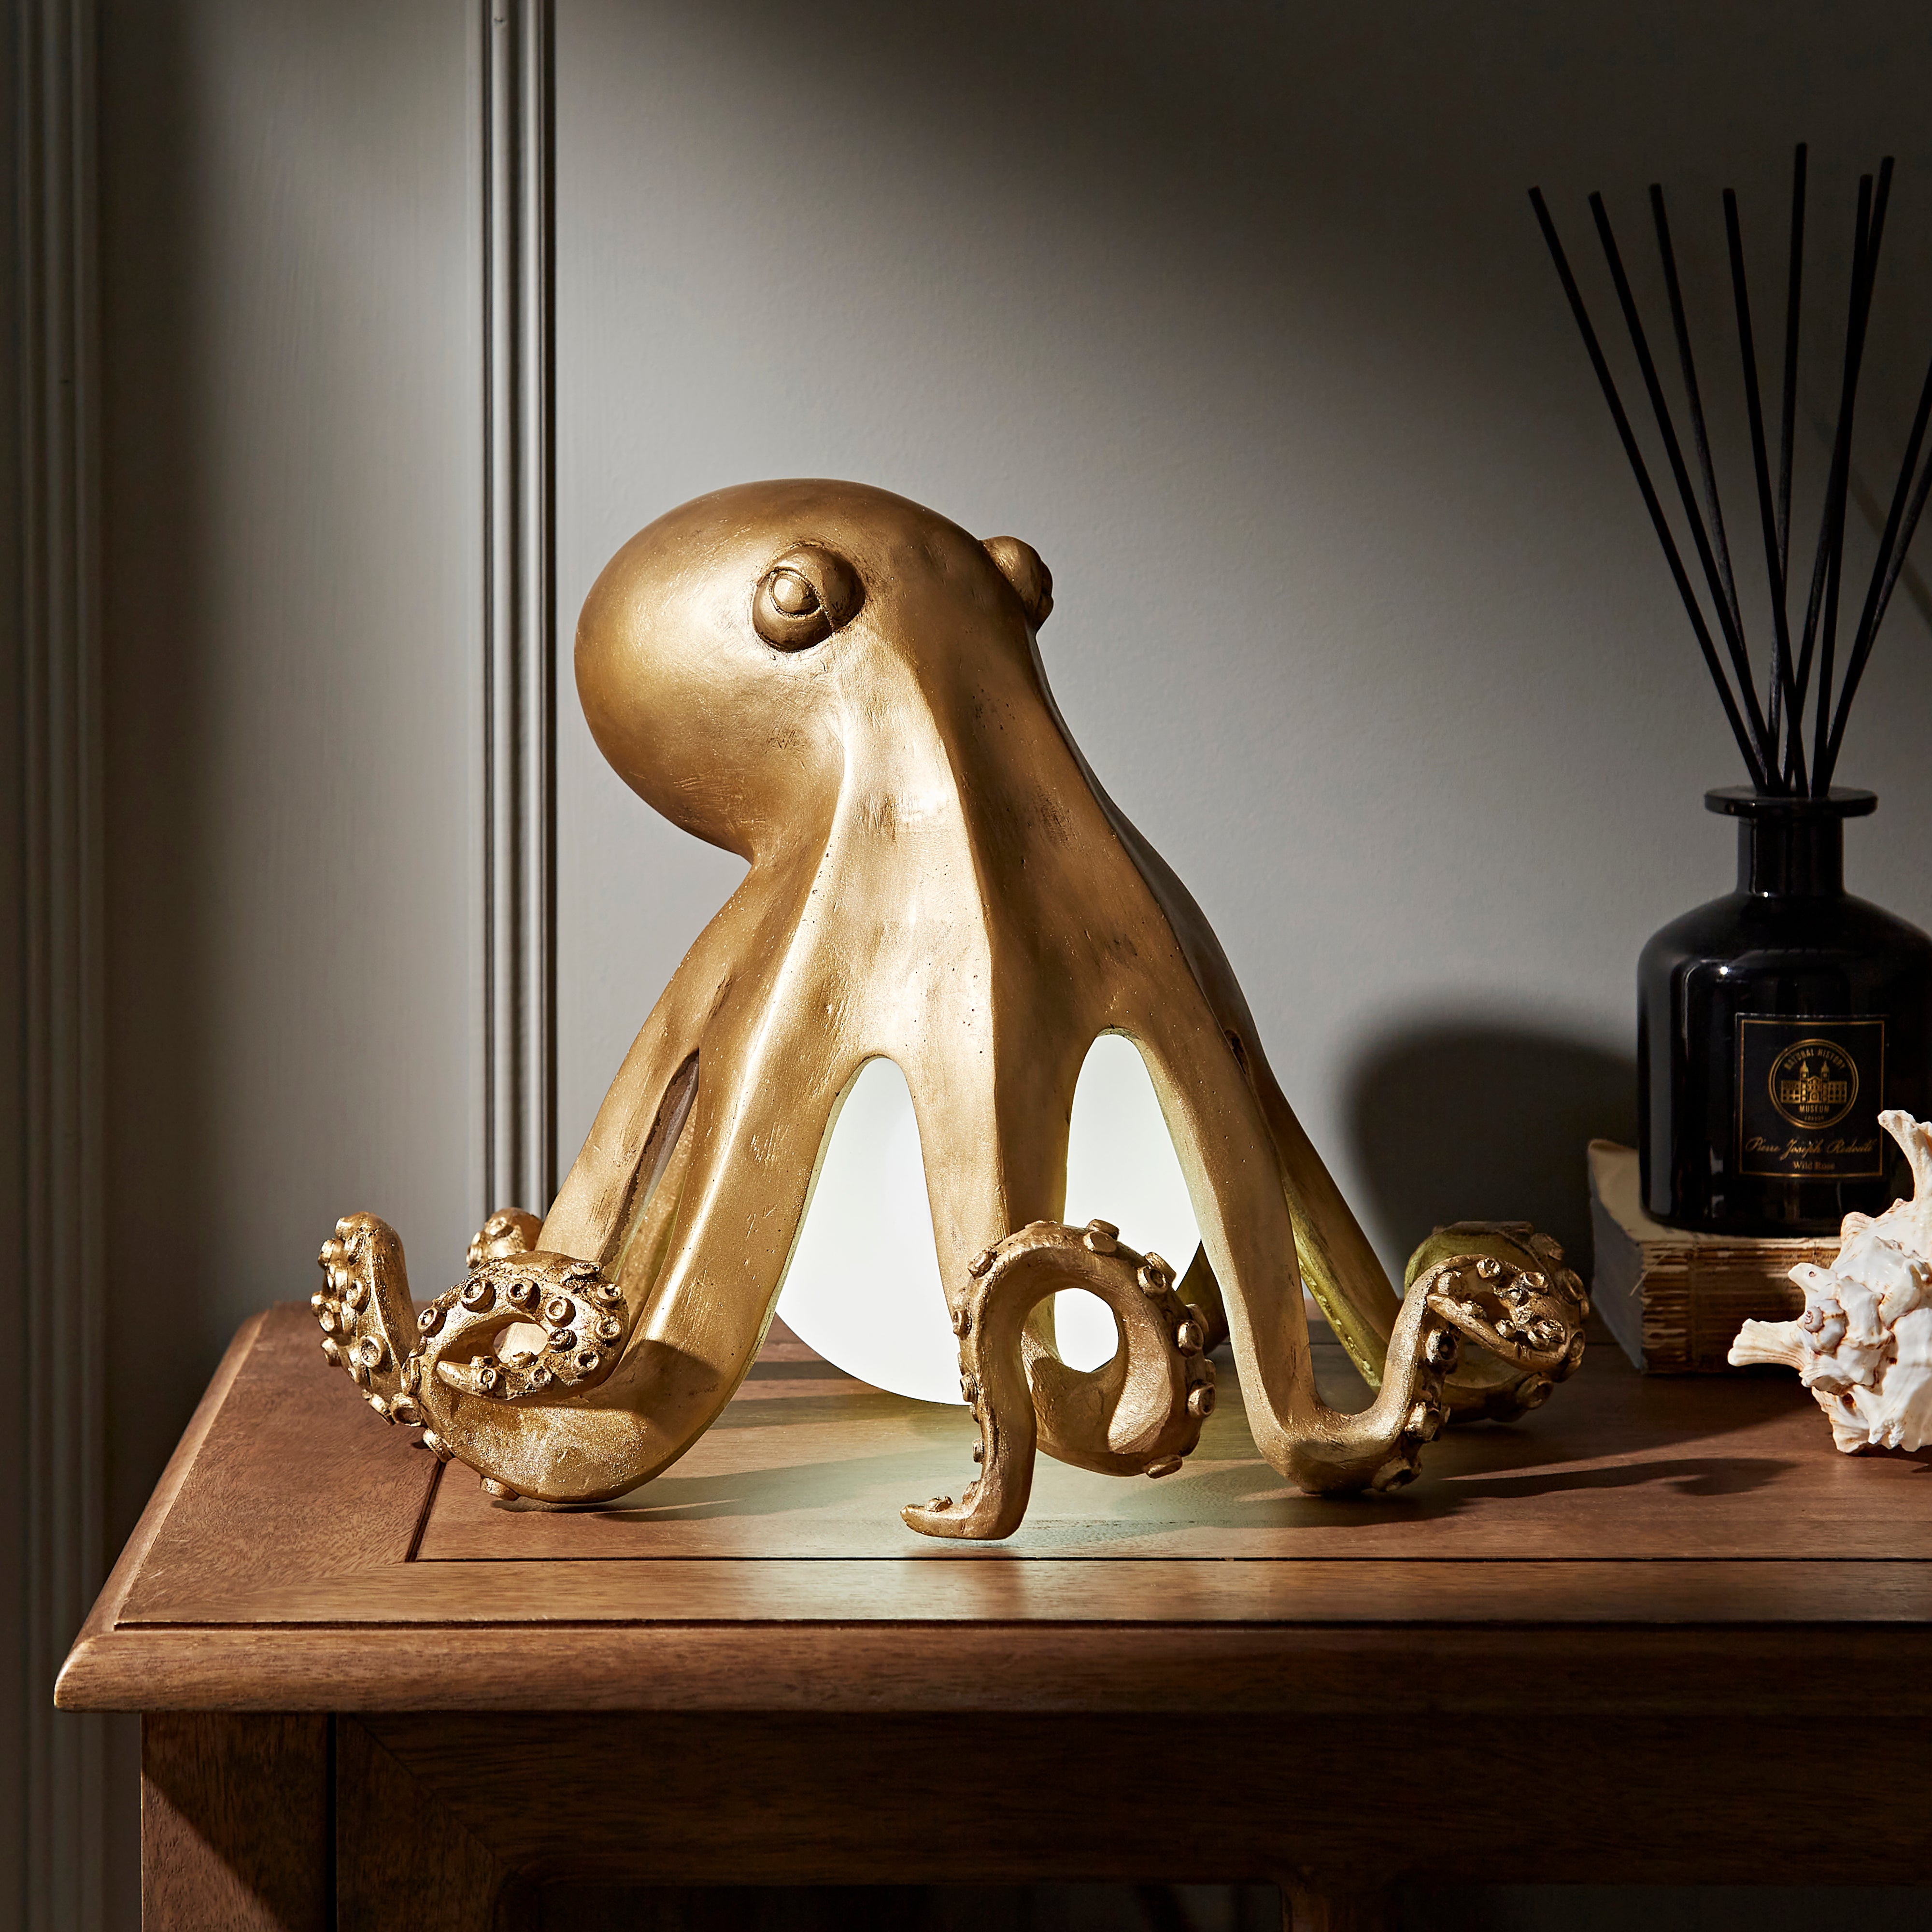 LED lamp - Otto the Octopus  Shop online hos - FILIBABBA